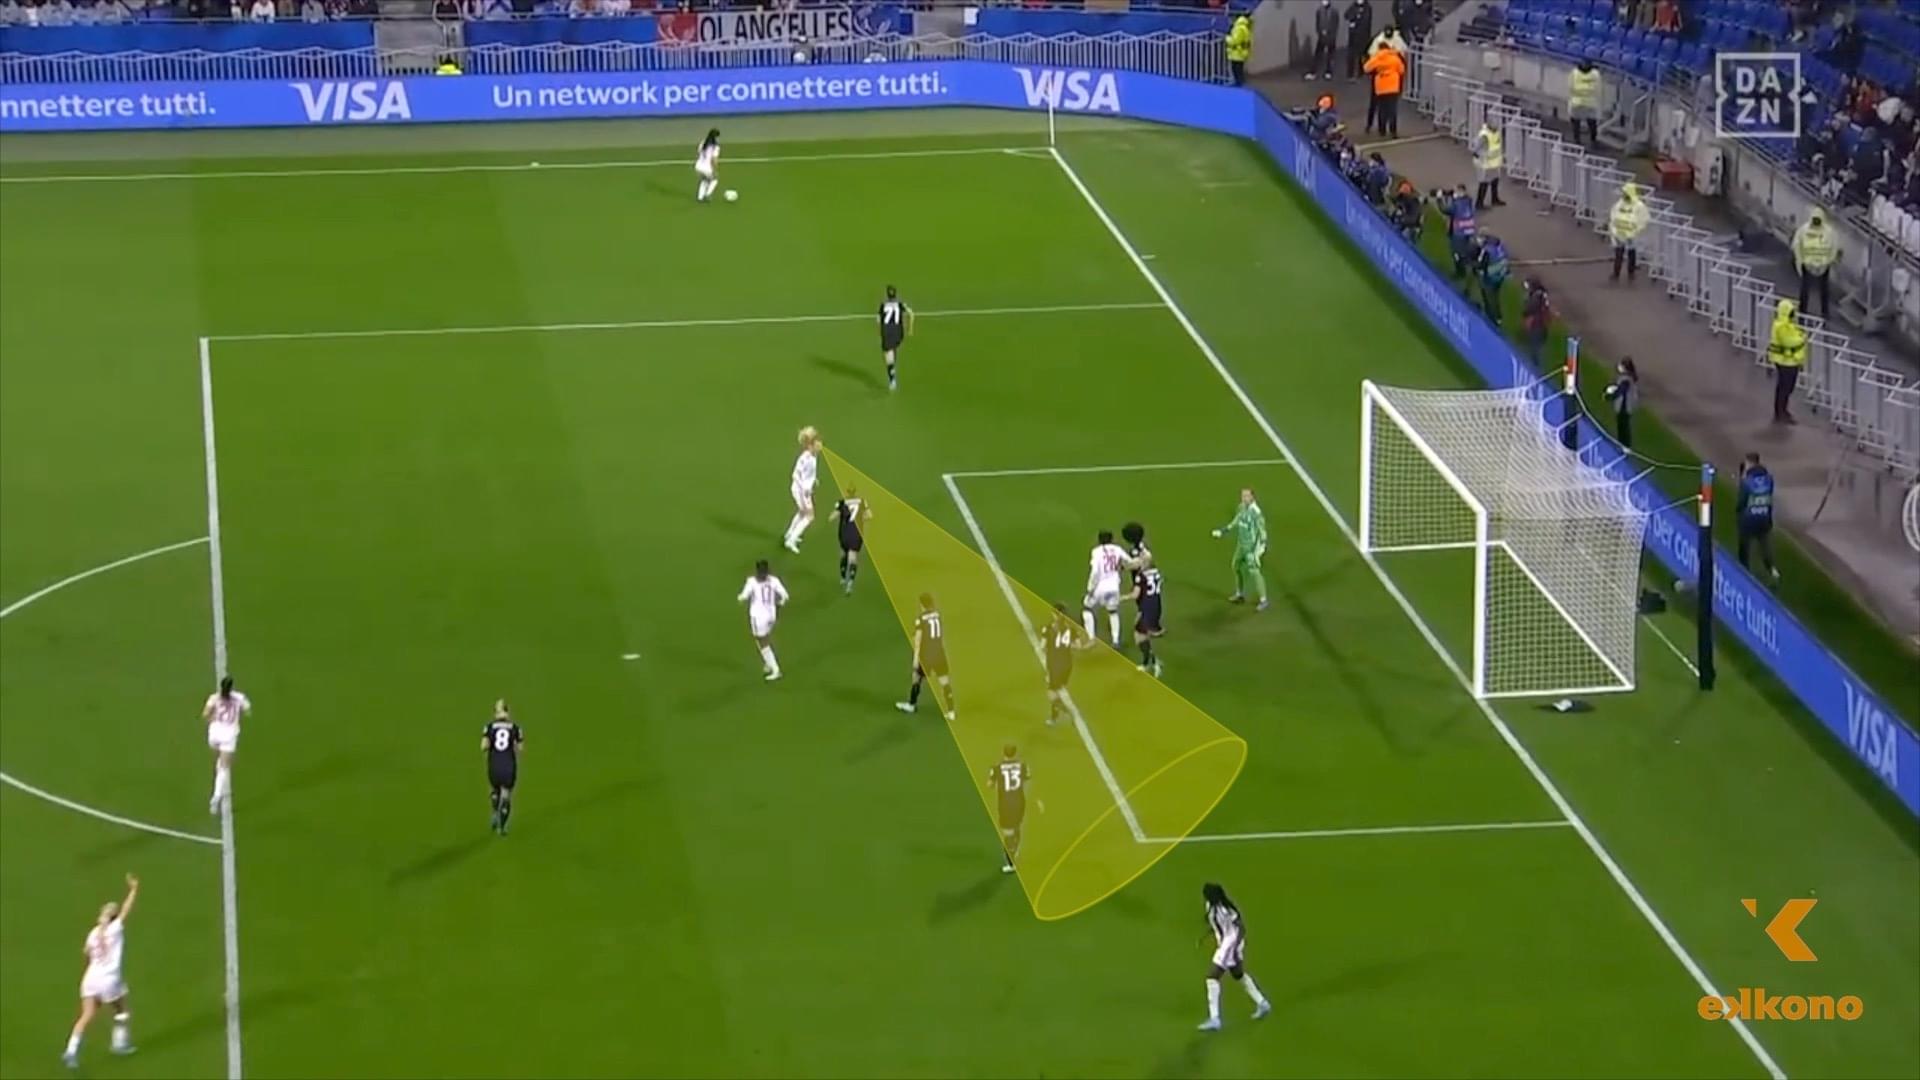 Inside the box, Hegerberg has the ability to detect free spaces to finish the action, even if these are opposite to where the ball comes from